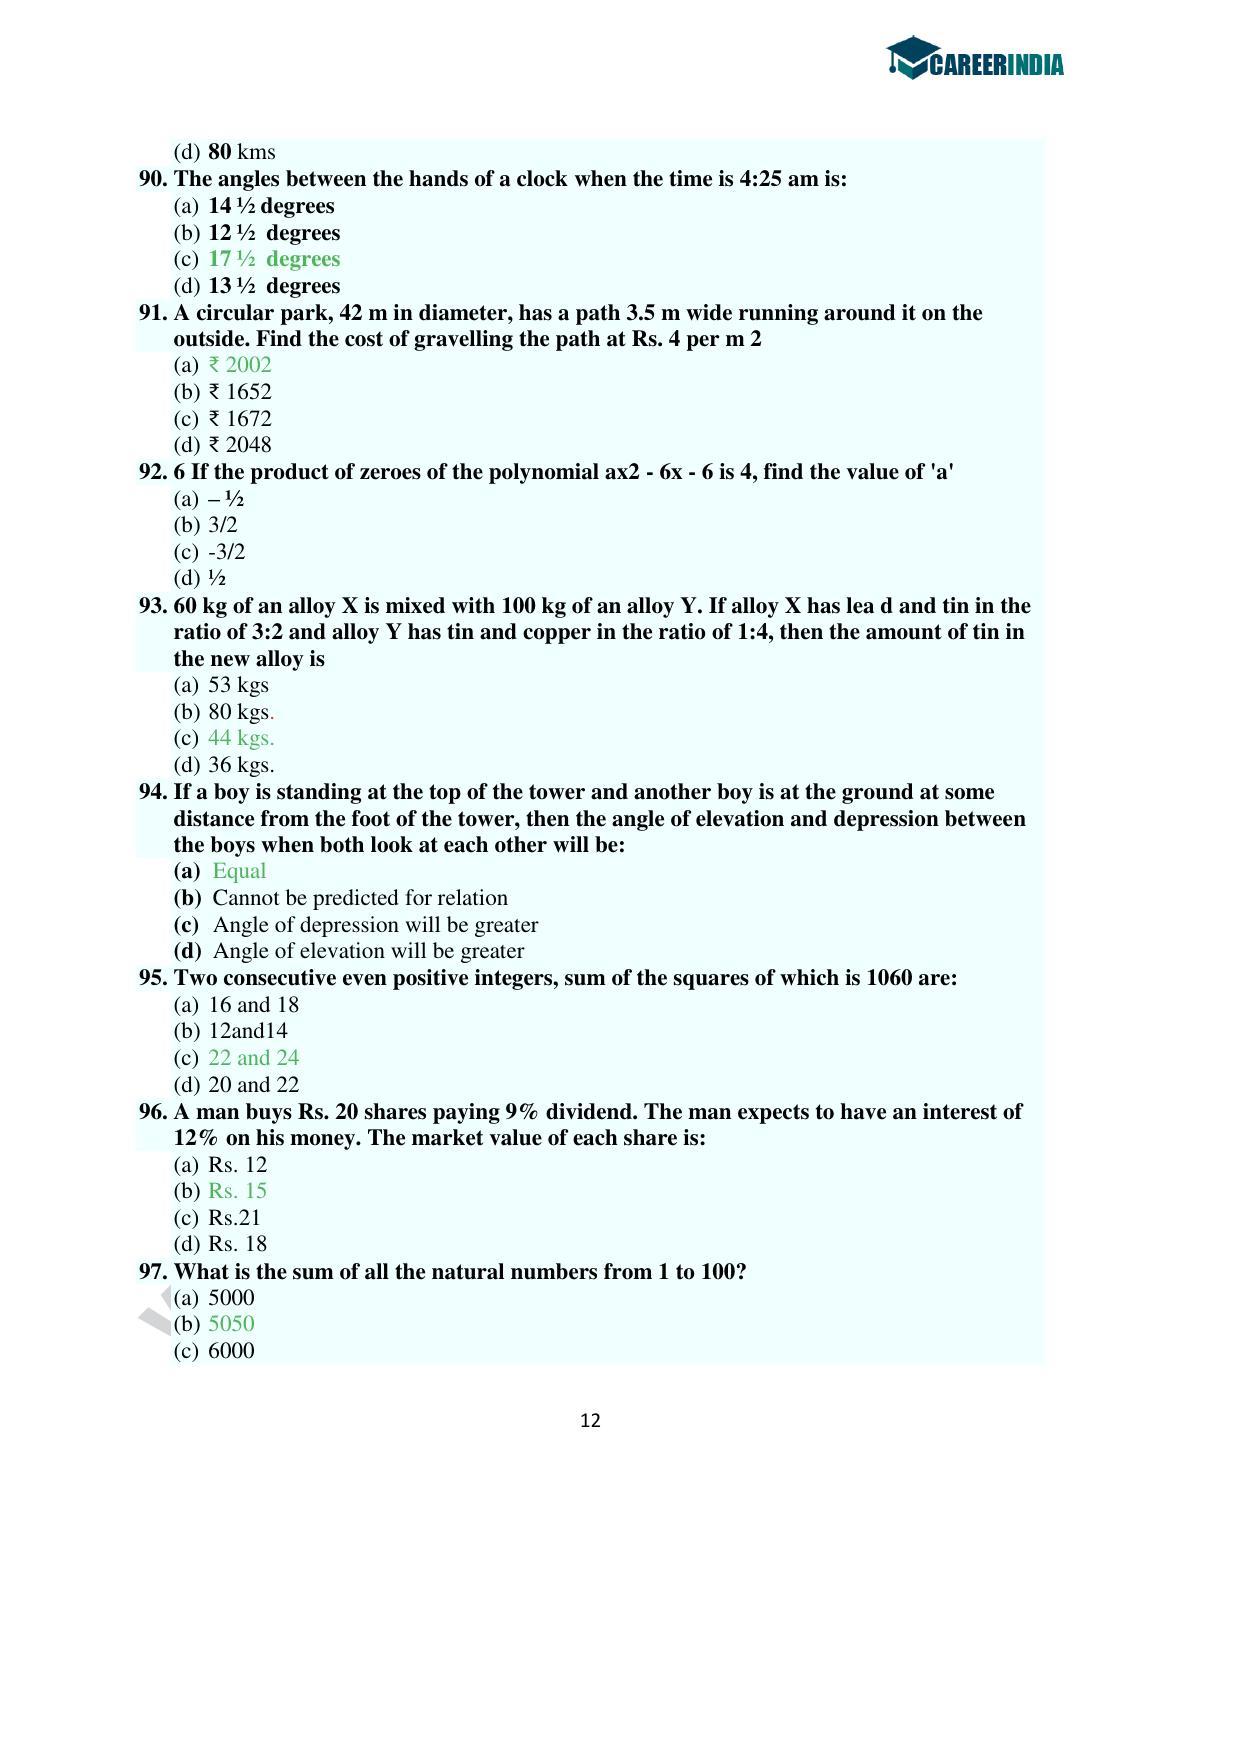 CLAT 2016 UG Question Paper with Answer Key - Page 12